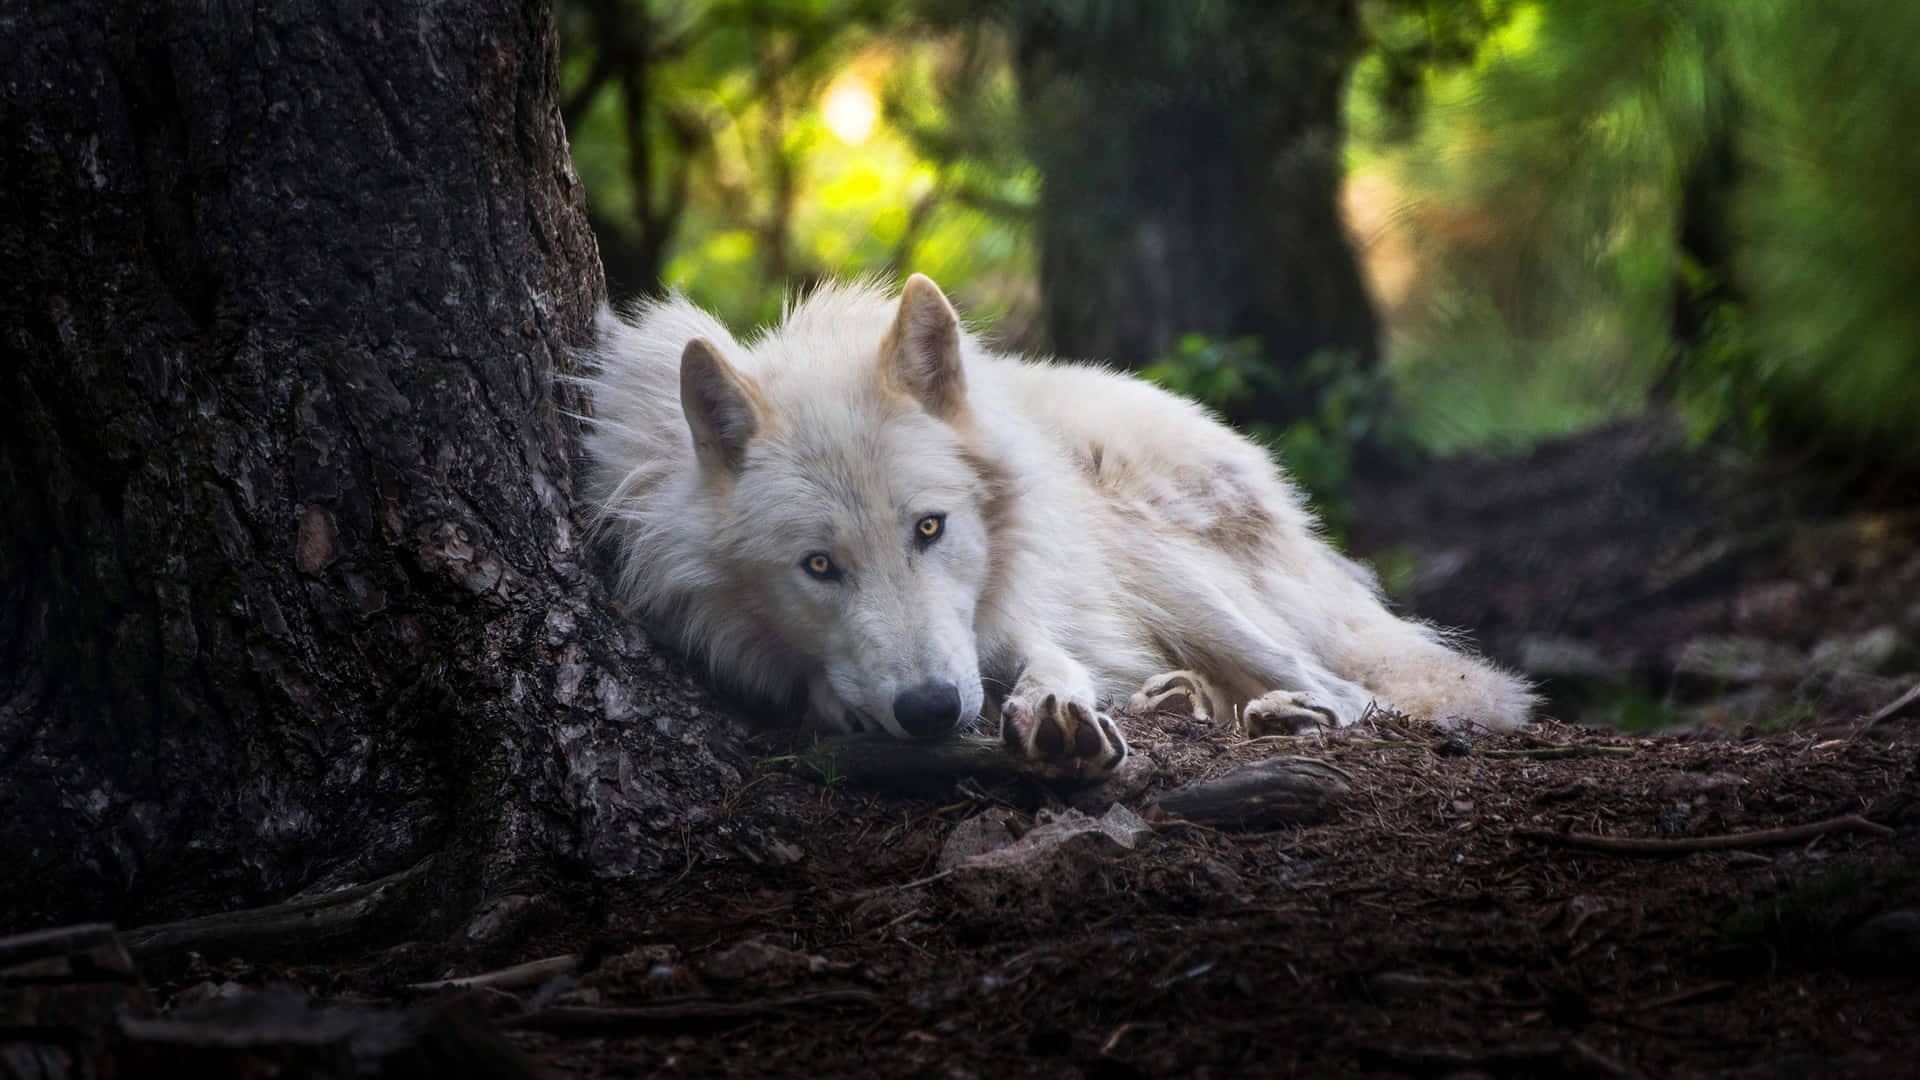 Majesty of the Wild - A regal Pretty Wolf takes in His Surroundings Wallpaper